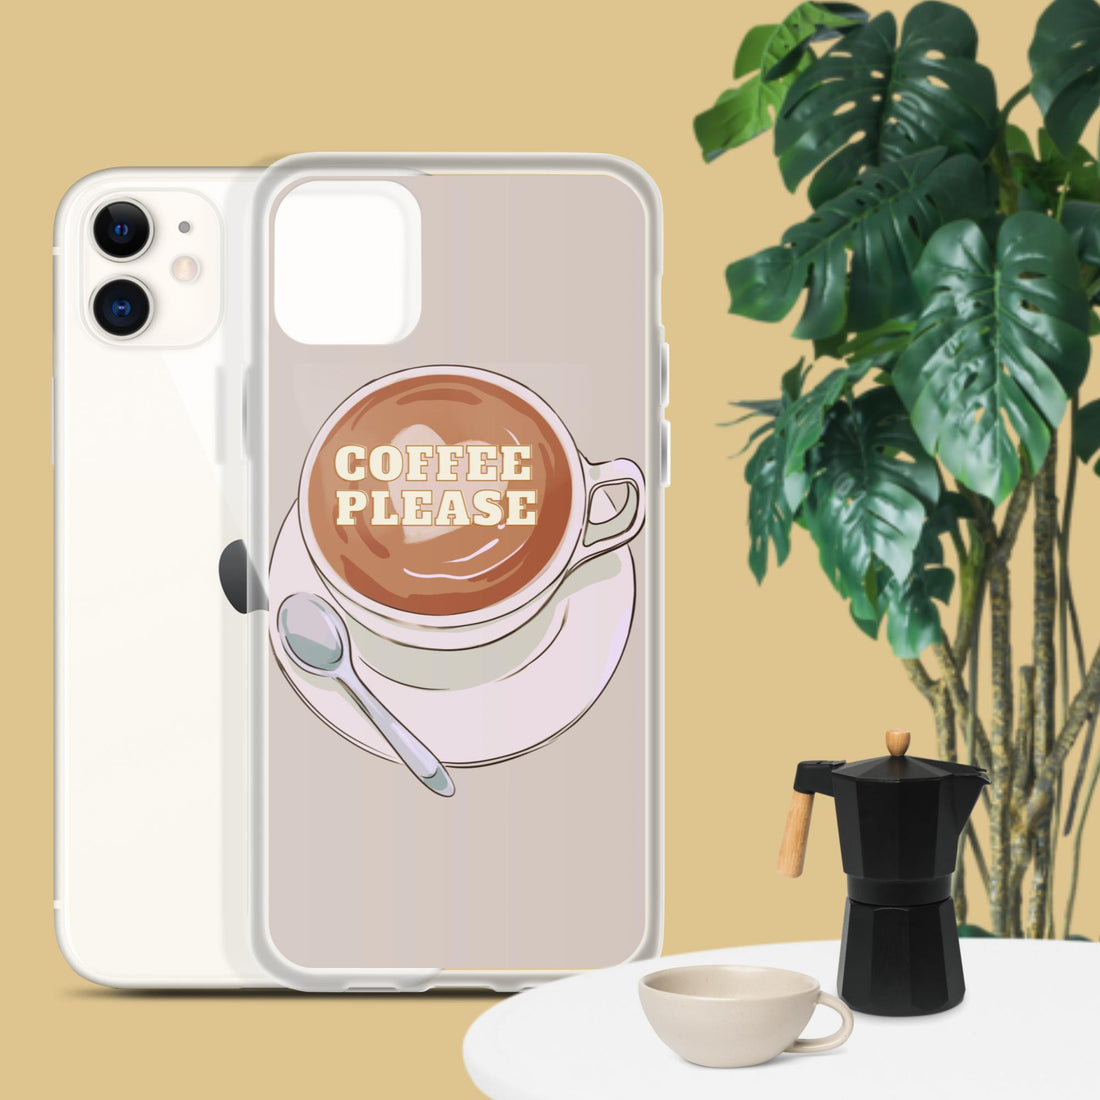 Clear Iphone Case - Coffee Please, image, Iphone Case